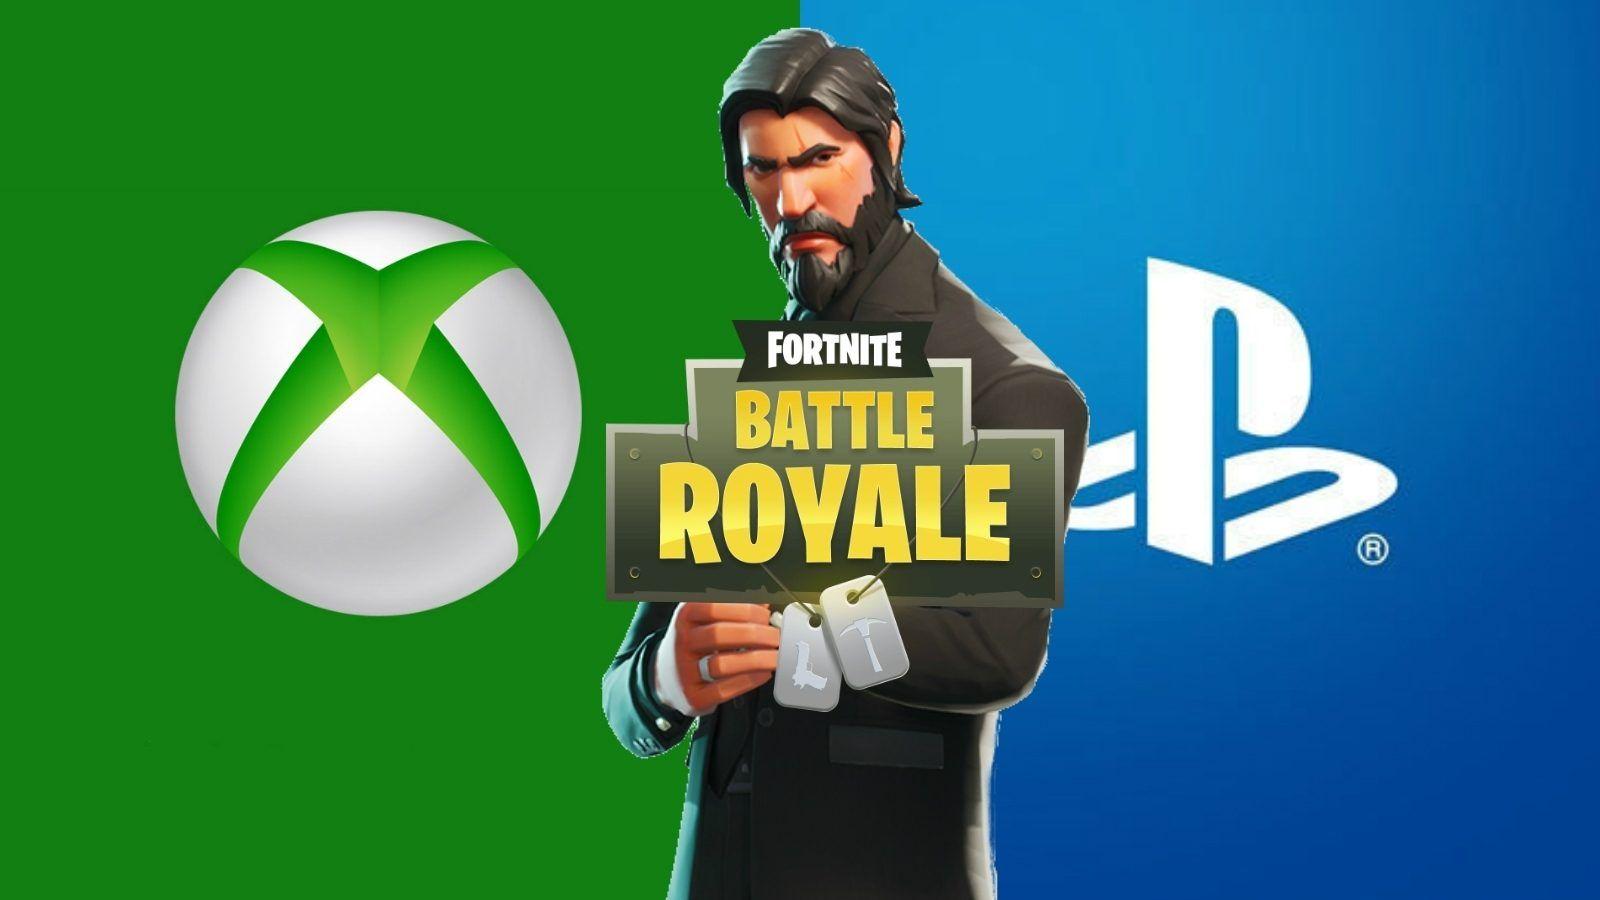 Xbox Fortnite Battle Royale Logo - Console Fortnite Player? How To Link Your Epic Games Account to Xbox